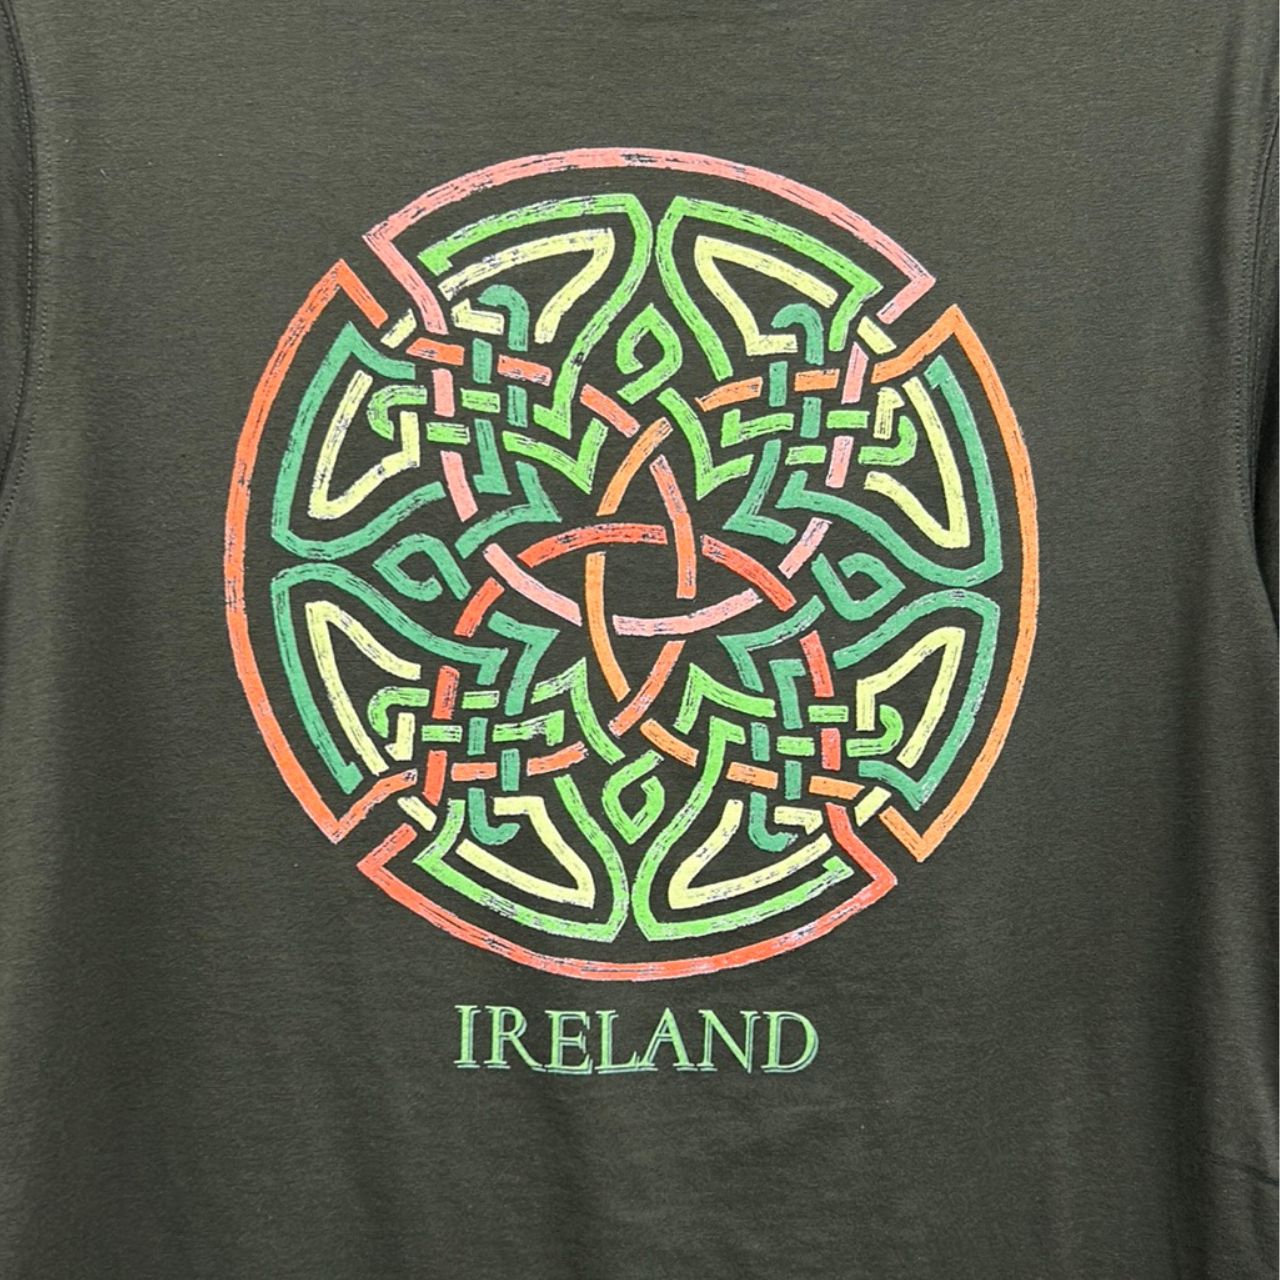 This t-shirt is designed with a celtic design and green 'Ireland' Text. This t-shirt is a round neck and is made of 100% cotton. This is a perfect gift or souvenir to remind you of your trip to Ireland.